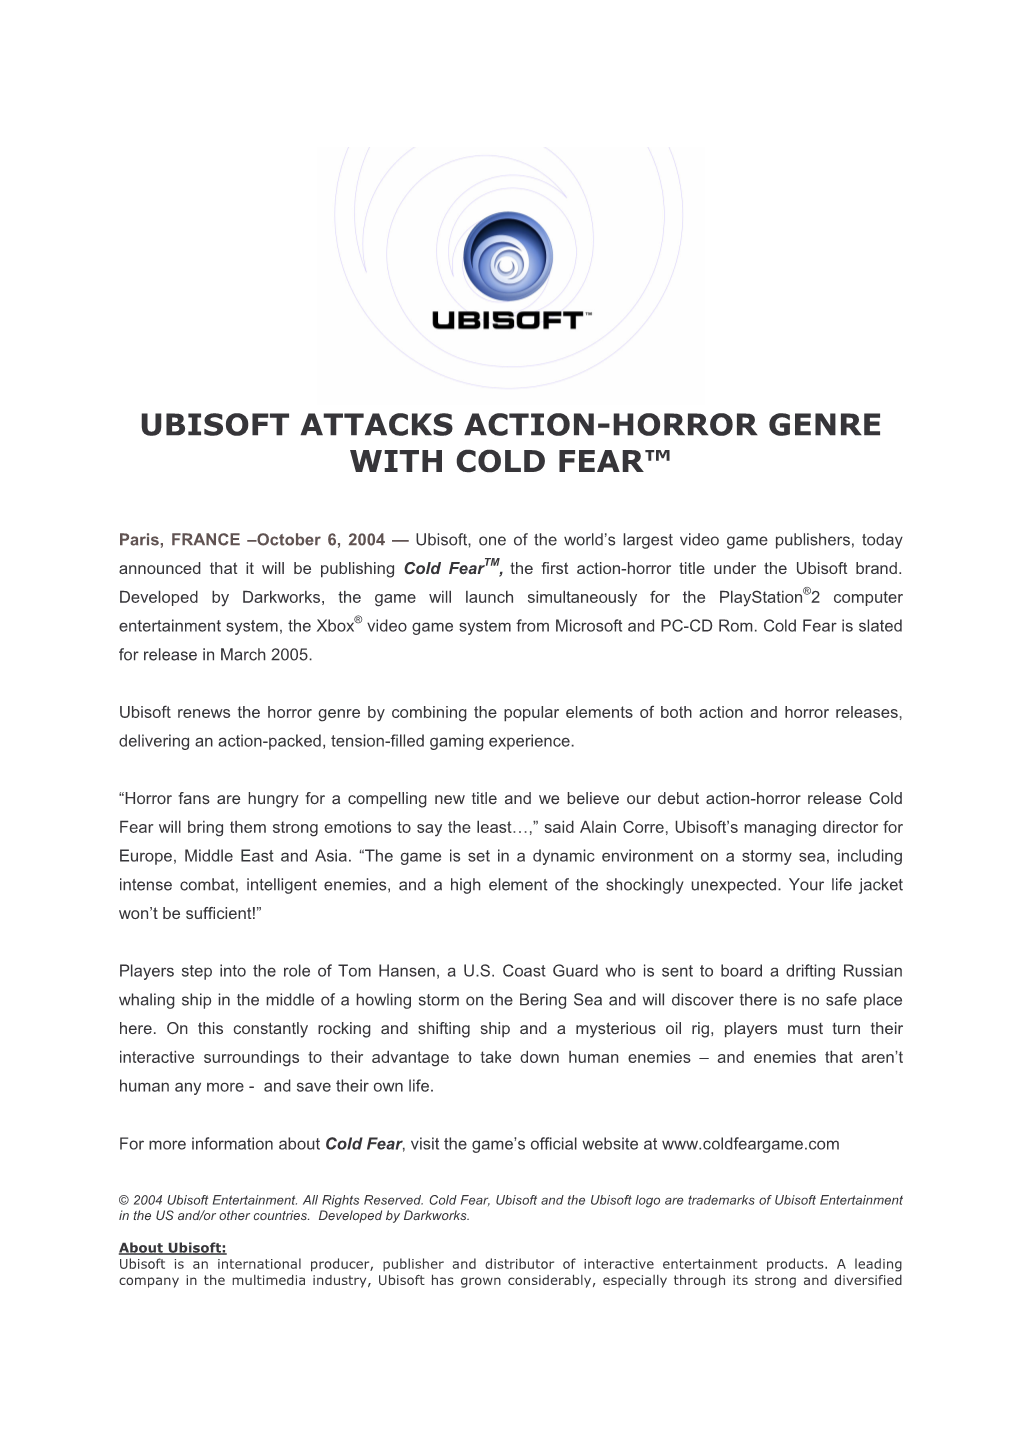 Ubisoft Attacks Action-Horror Genre with Cold Fear™